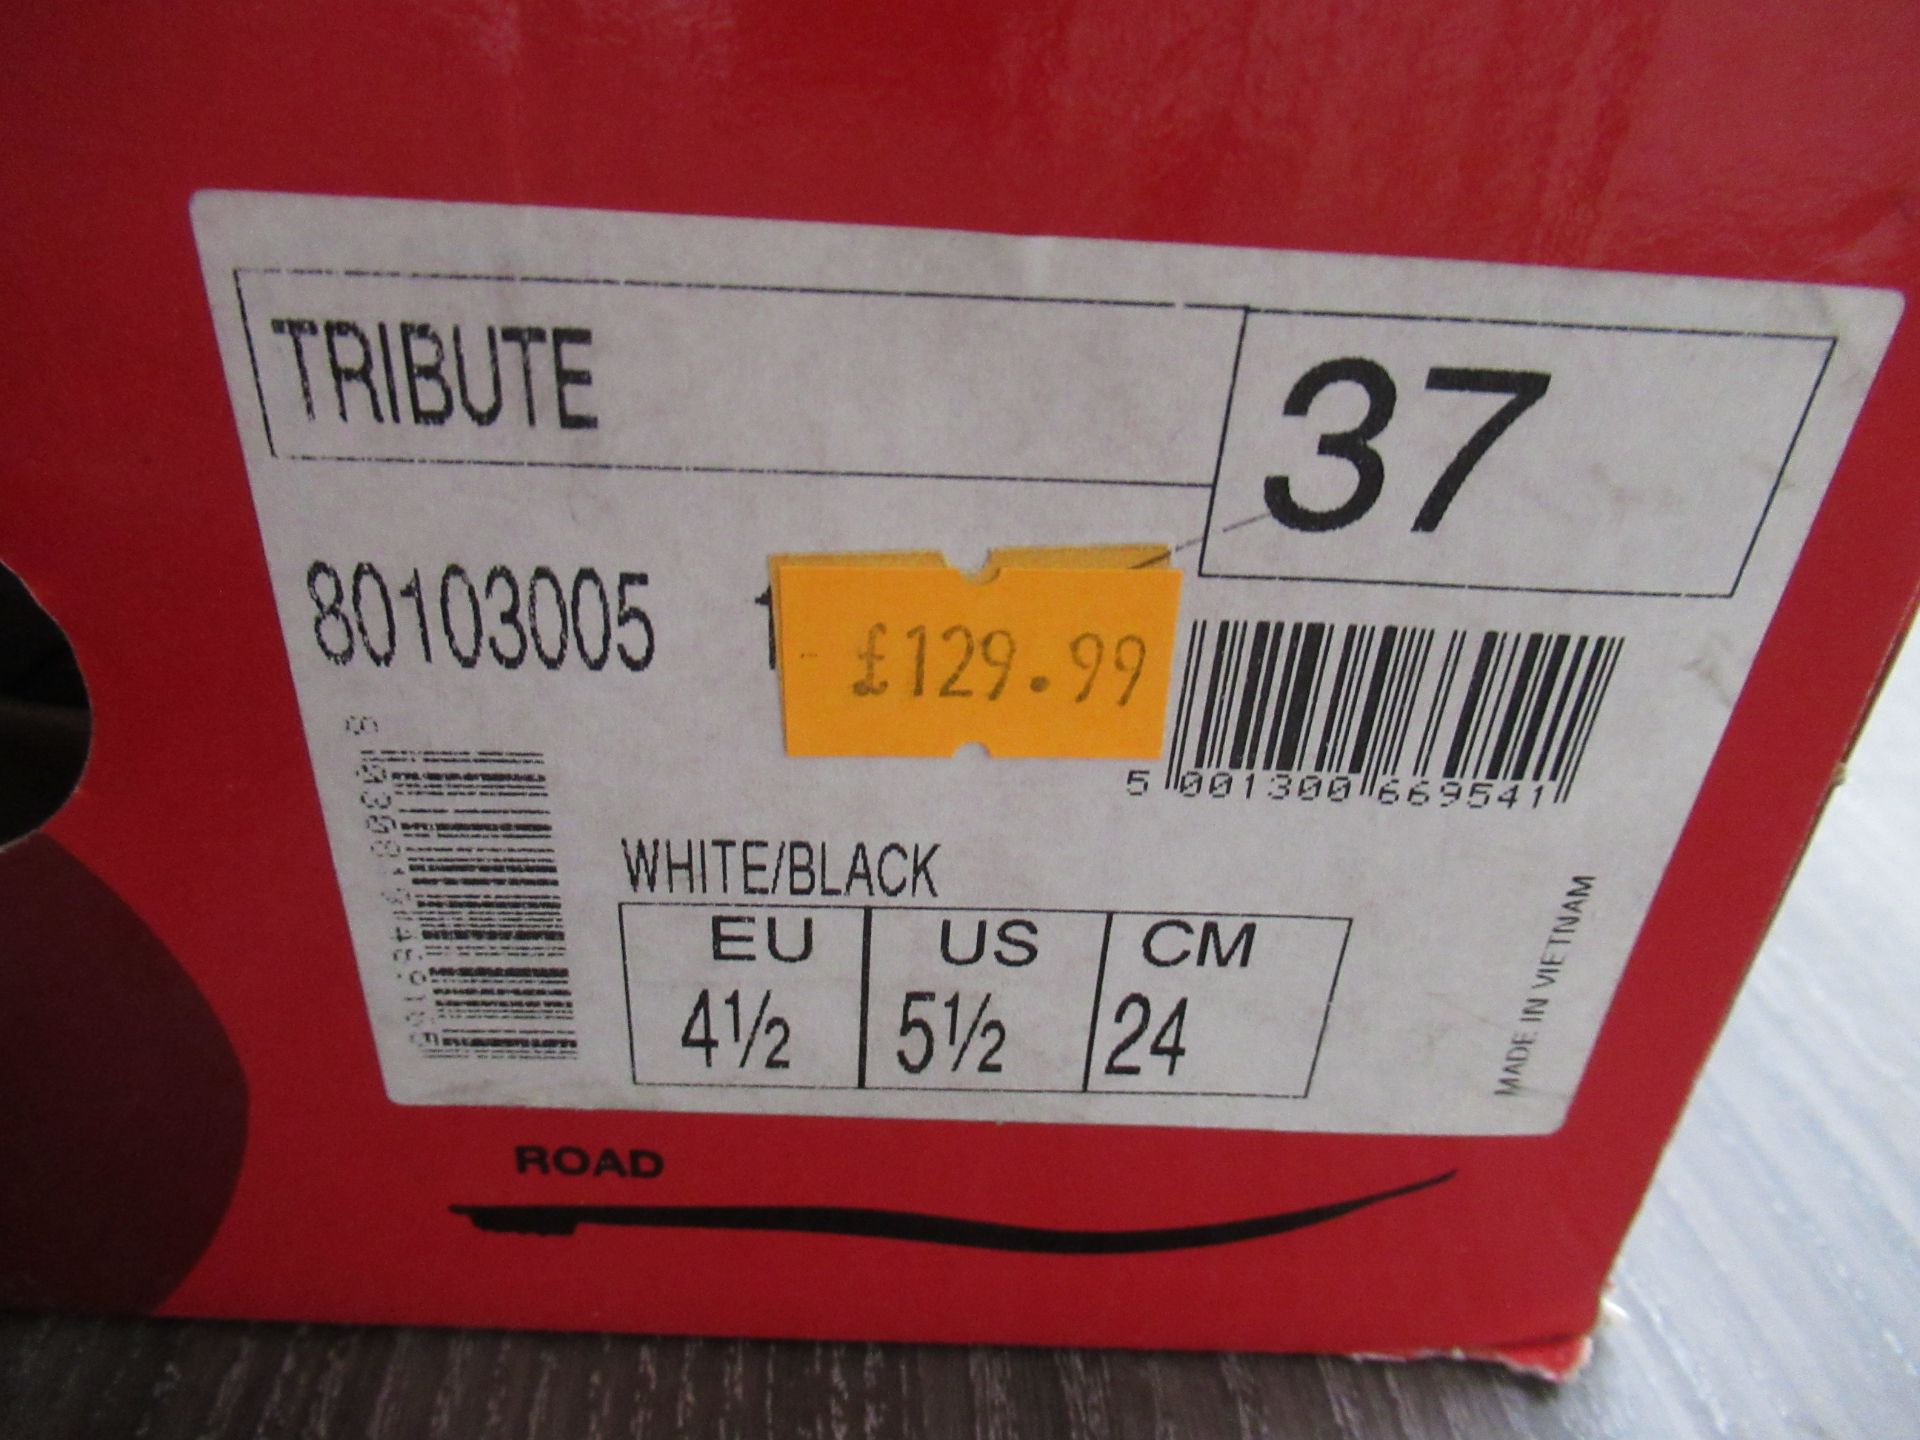 Pair of Northwave Tribute cycling shoes (white/black) - boxed EU size 37 (RRP£129.99) - Image 2 of 3